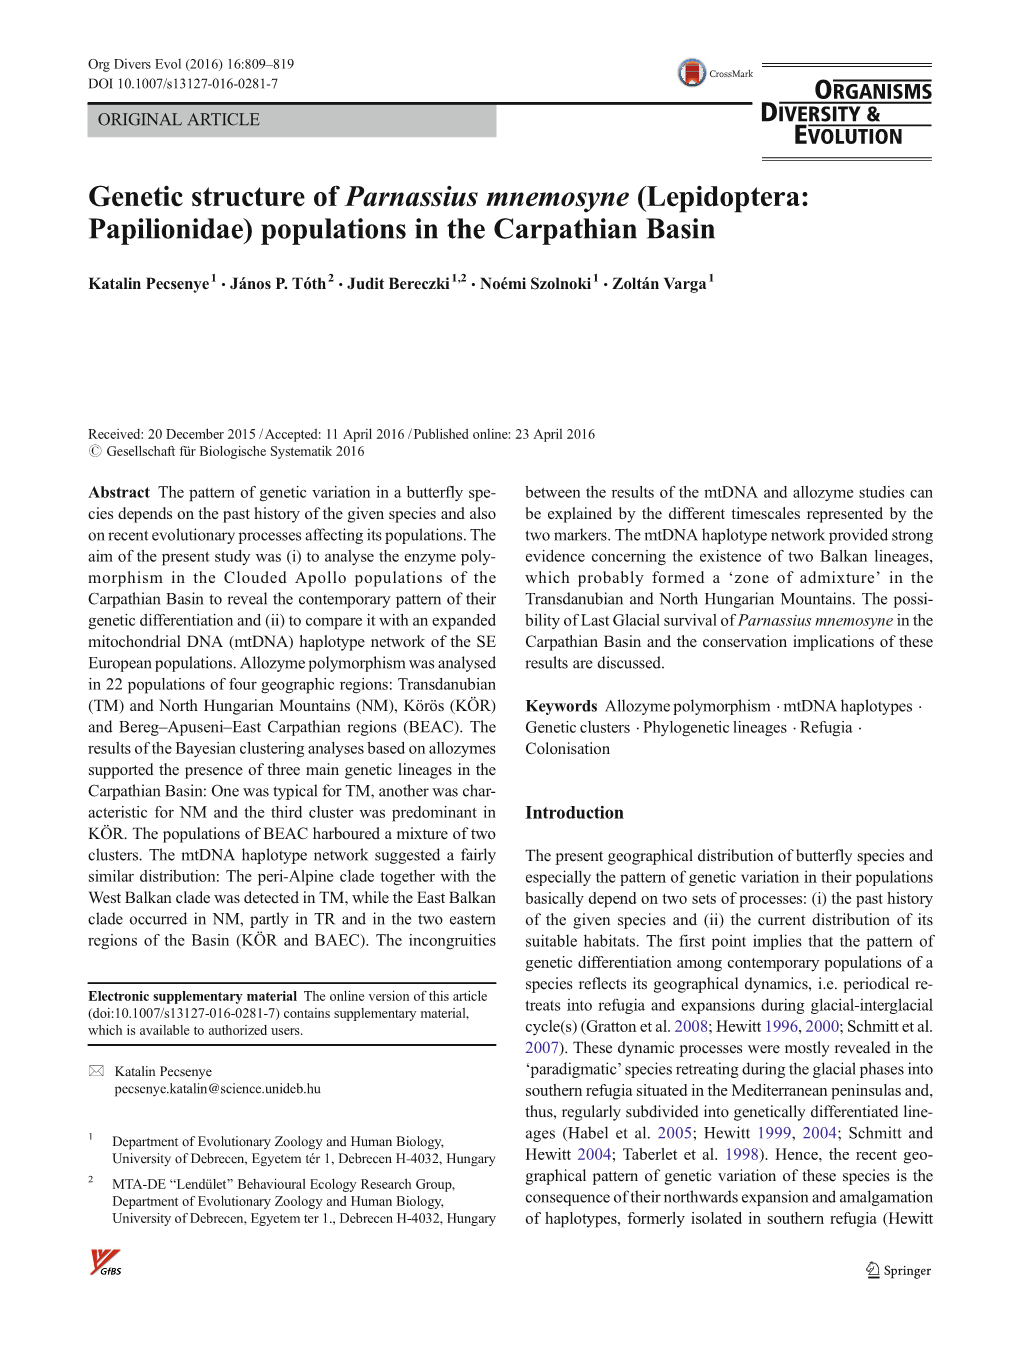 Genetic Structure of Parnassius Mnemosyne (Lepidoptera: Papilionidae) Populations in the Carpathian Basin